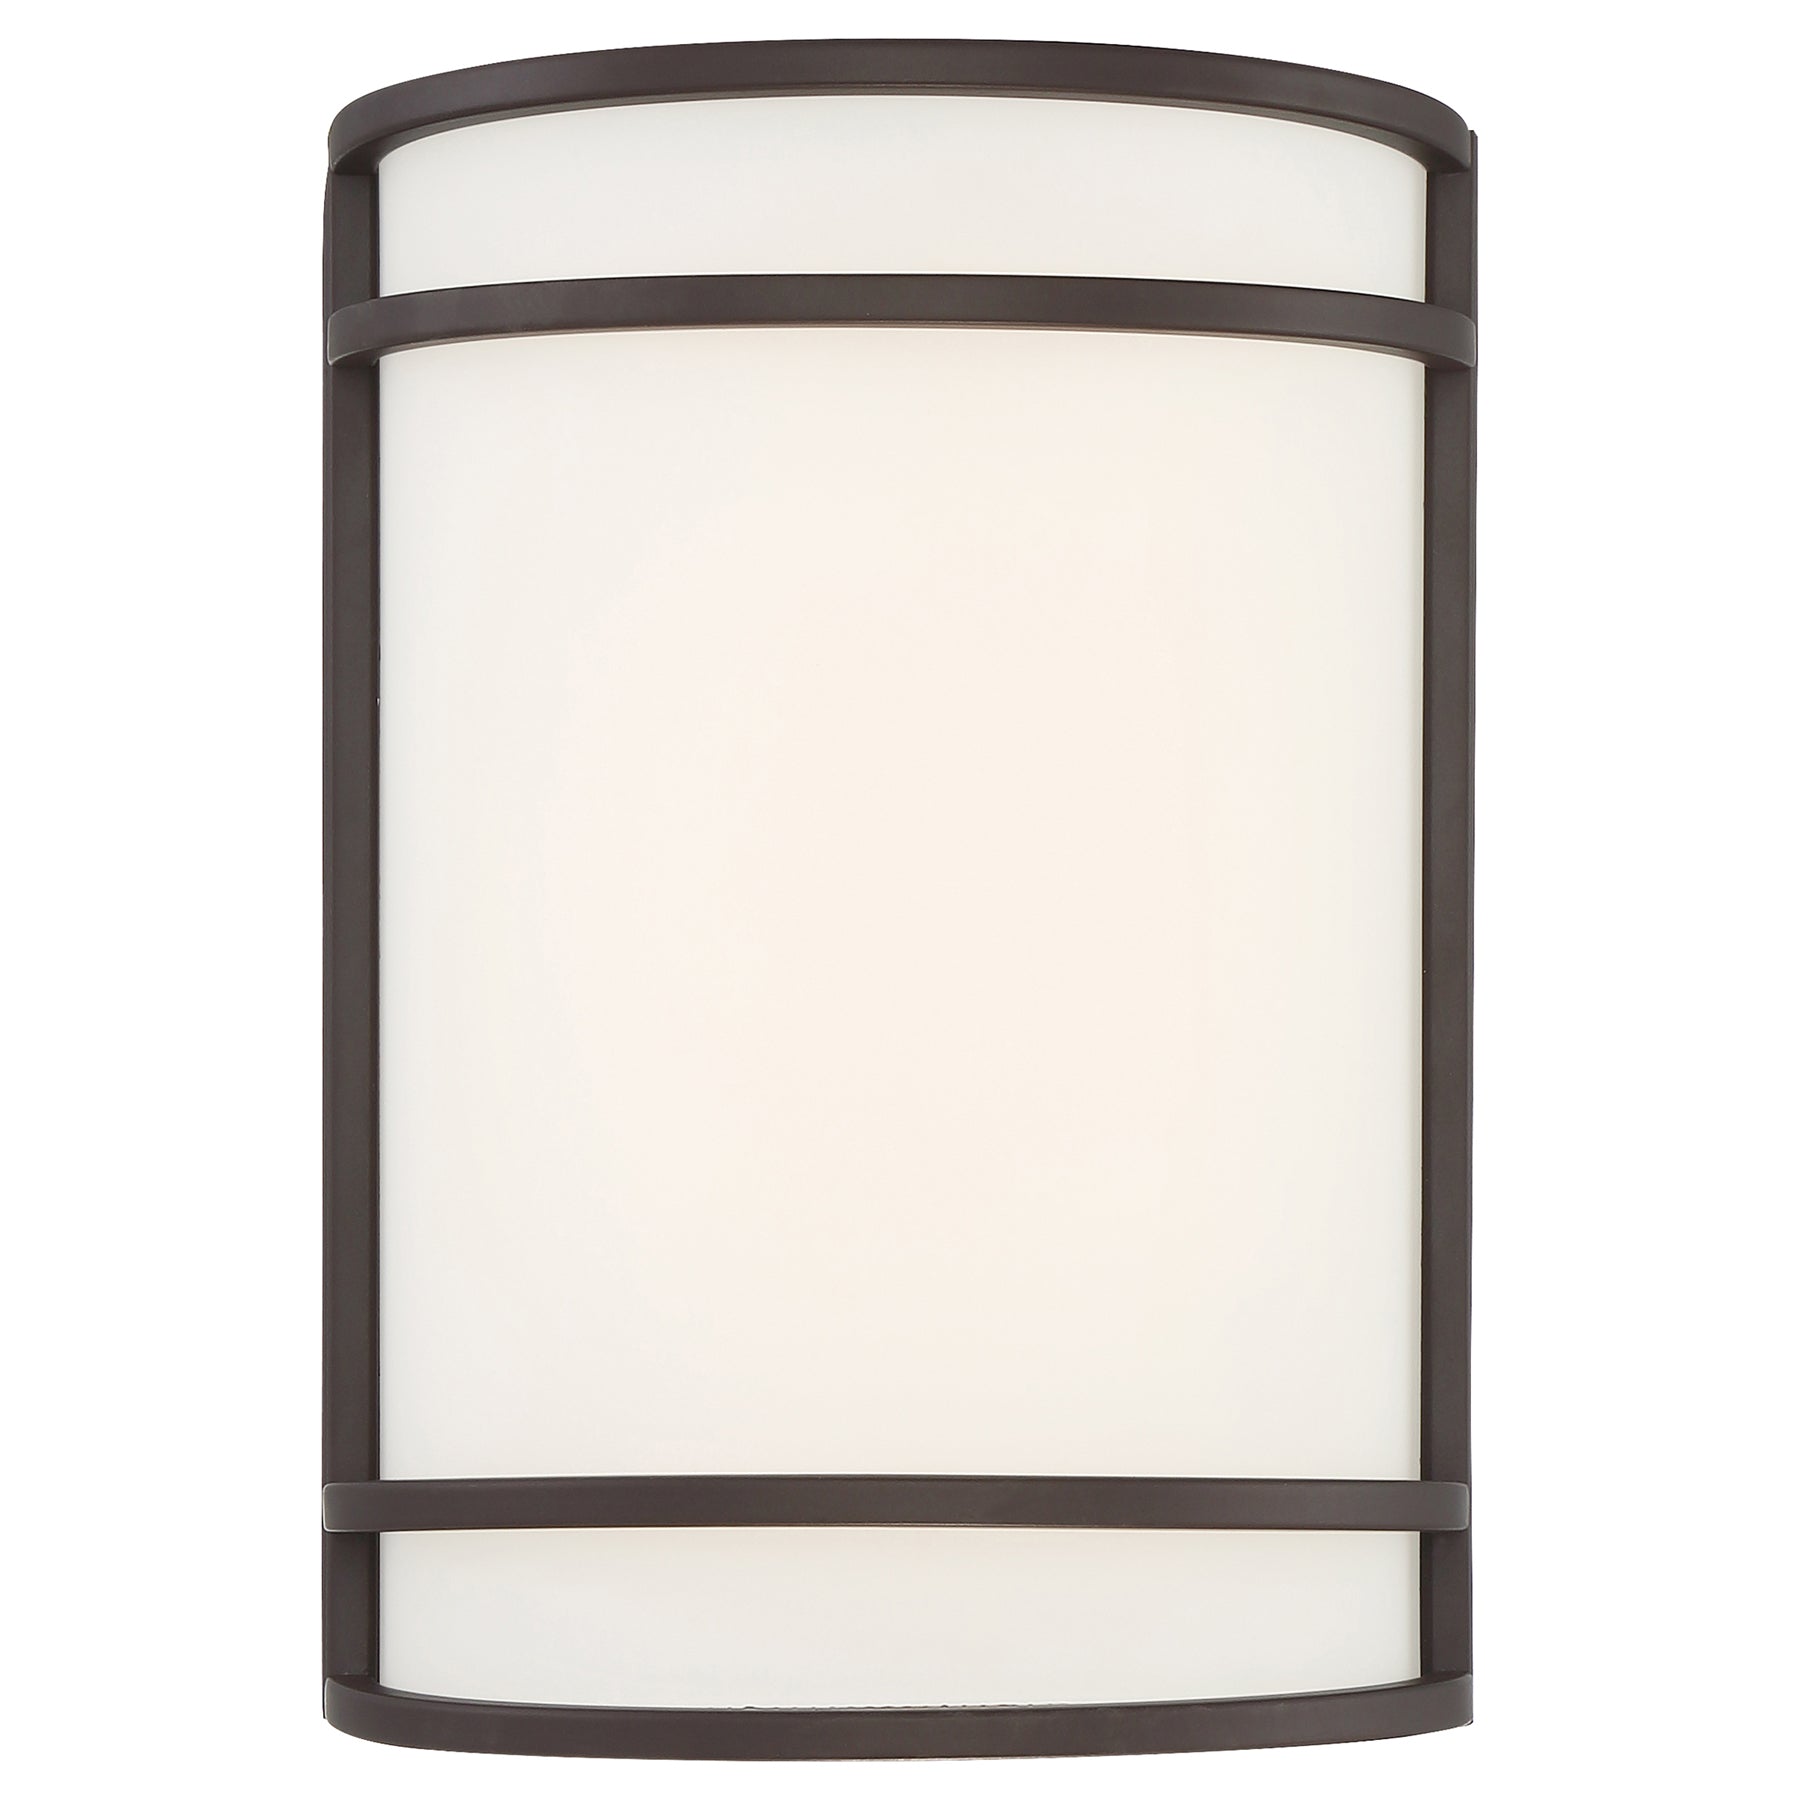 Lola 10in. LED Wall Sconce Lighting (Bronze)